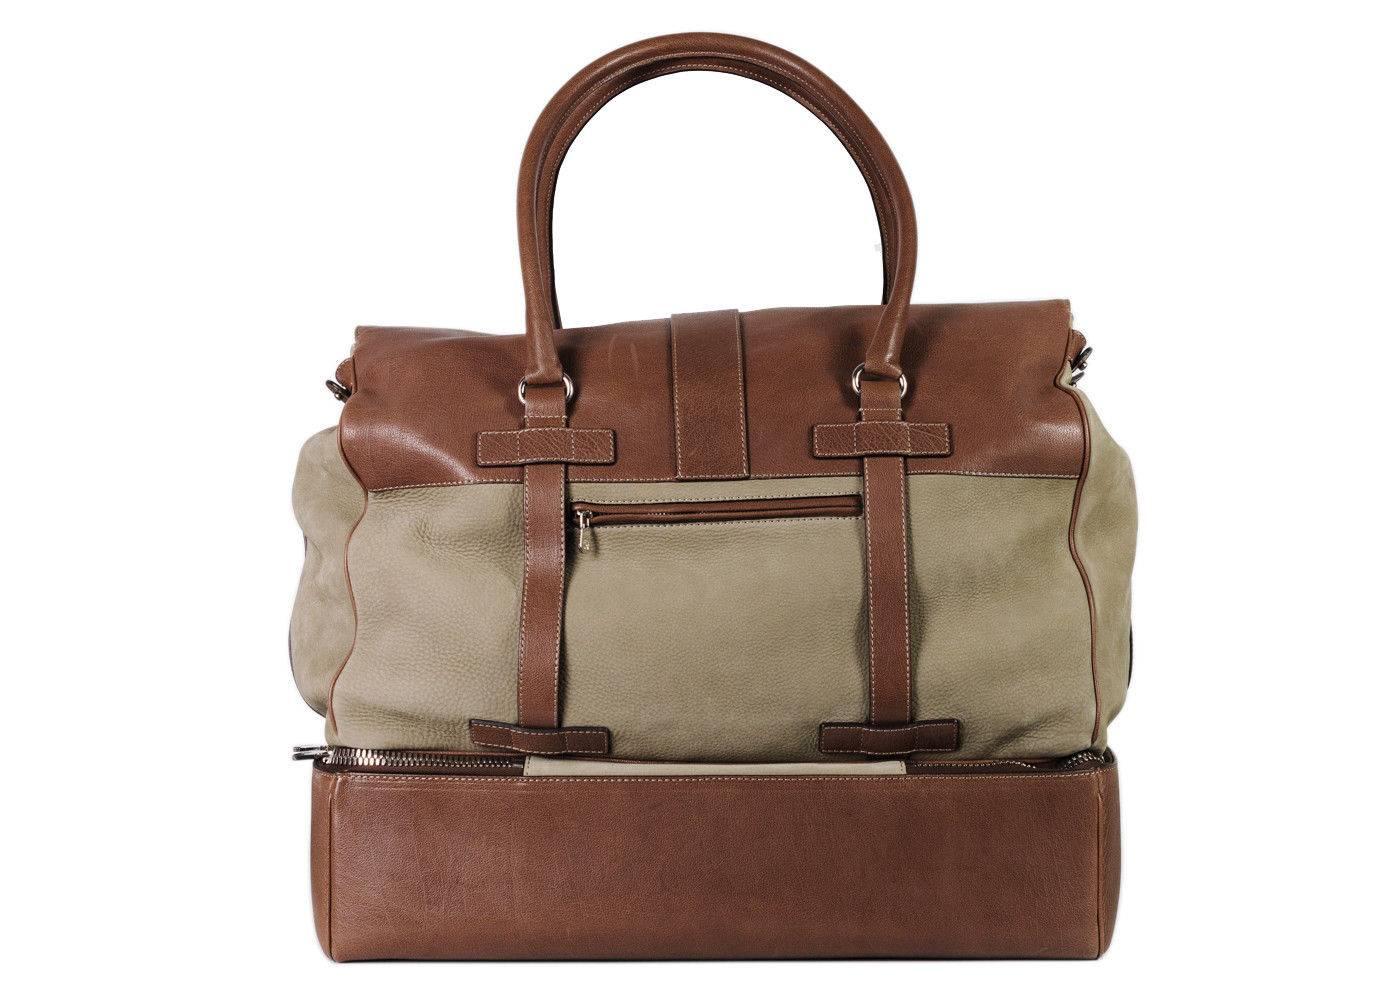 Brand New Brunello Cucinelli Travel Bag
Dust Bag Included
Retails in Stores & Online for $2450
Dimensions: 19.5